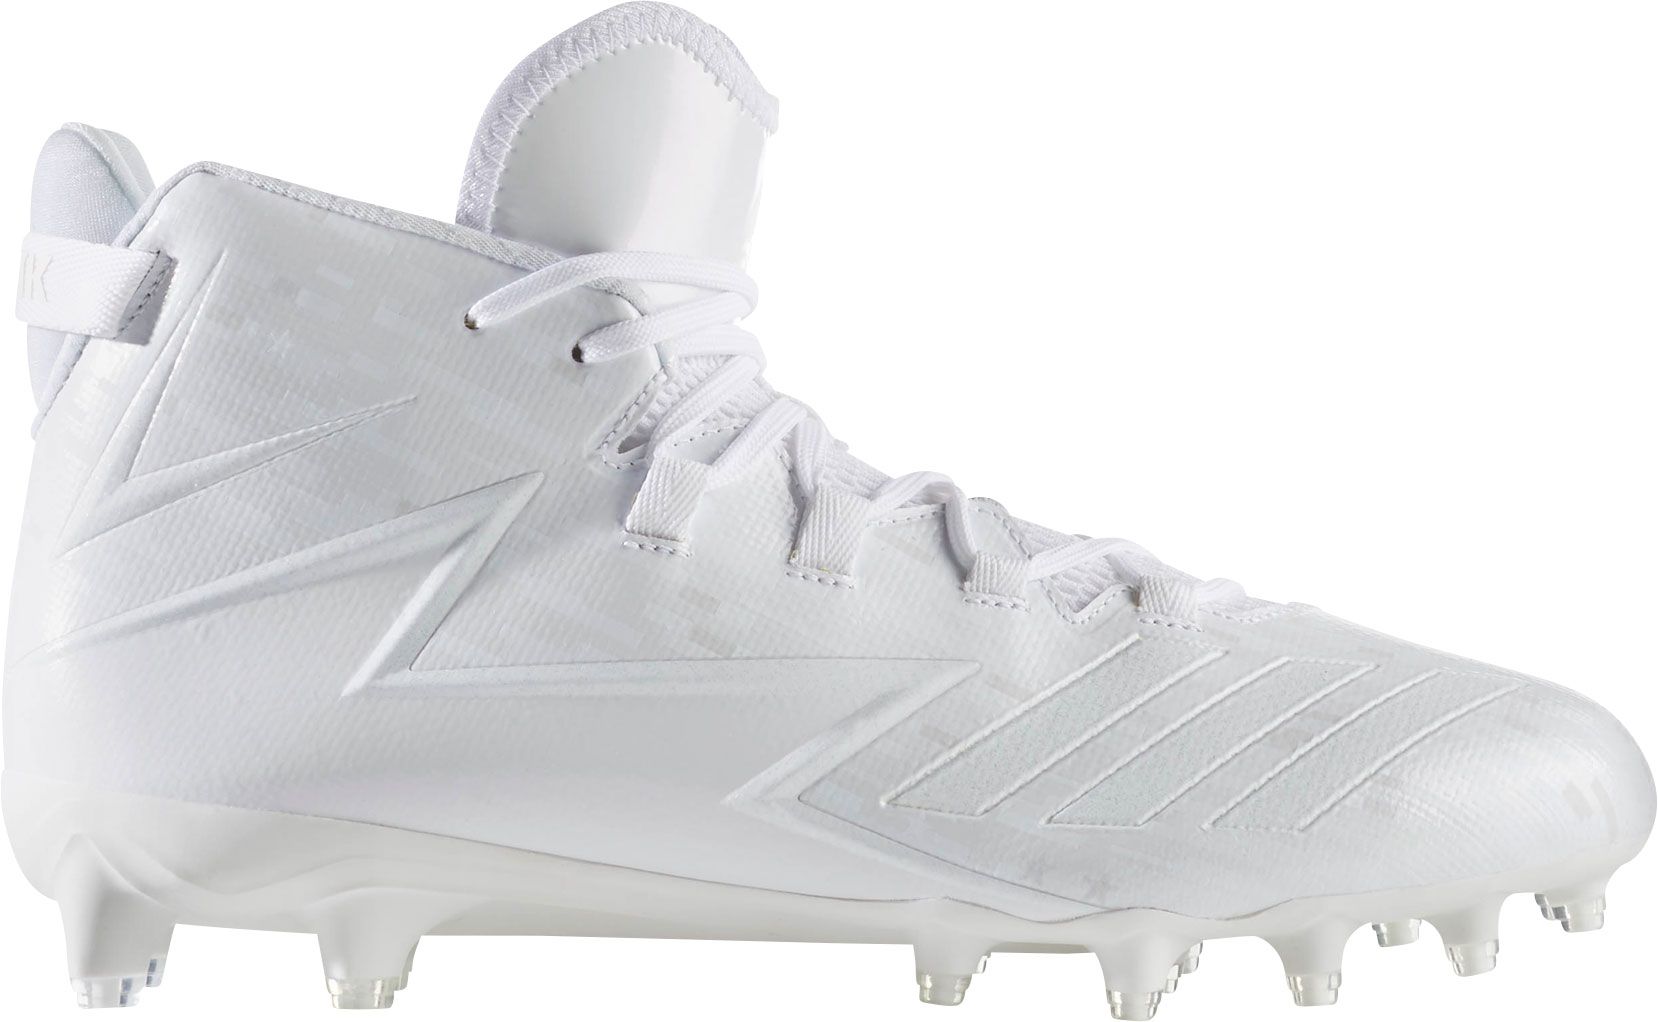 Football Cleats | DICK'S Sporting Goods